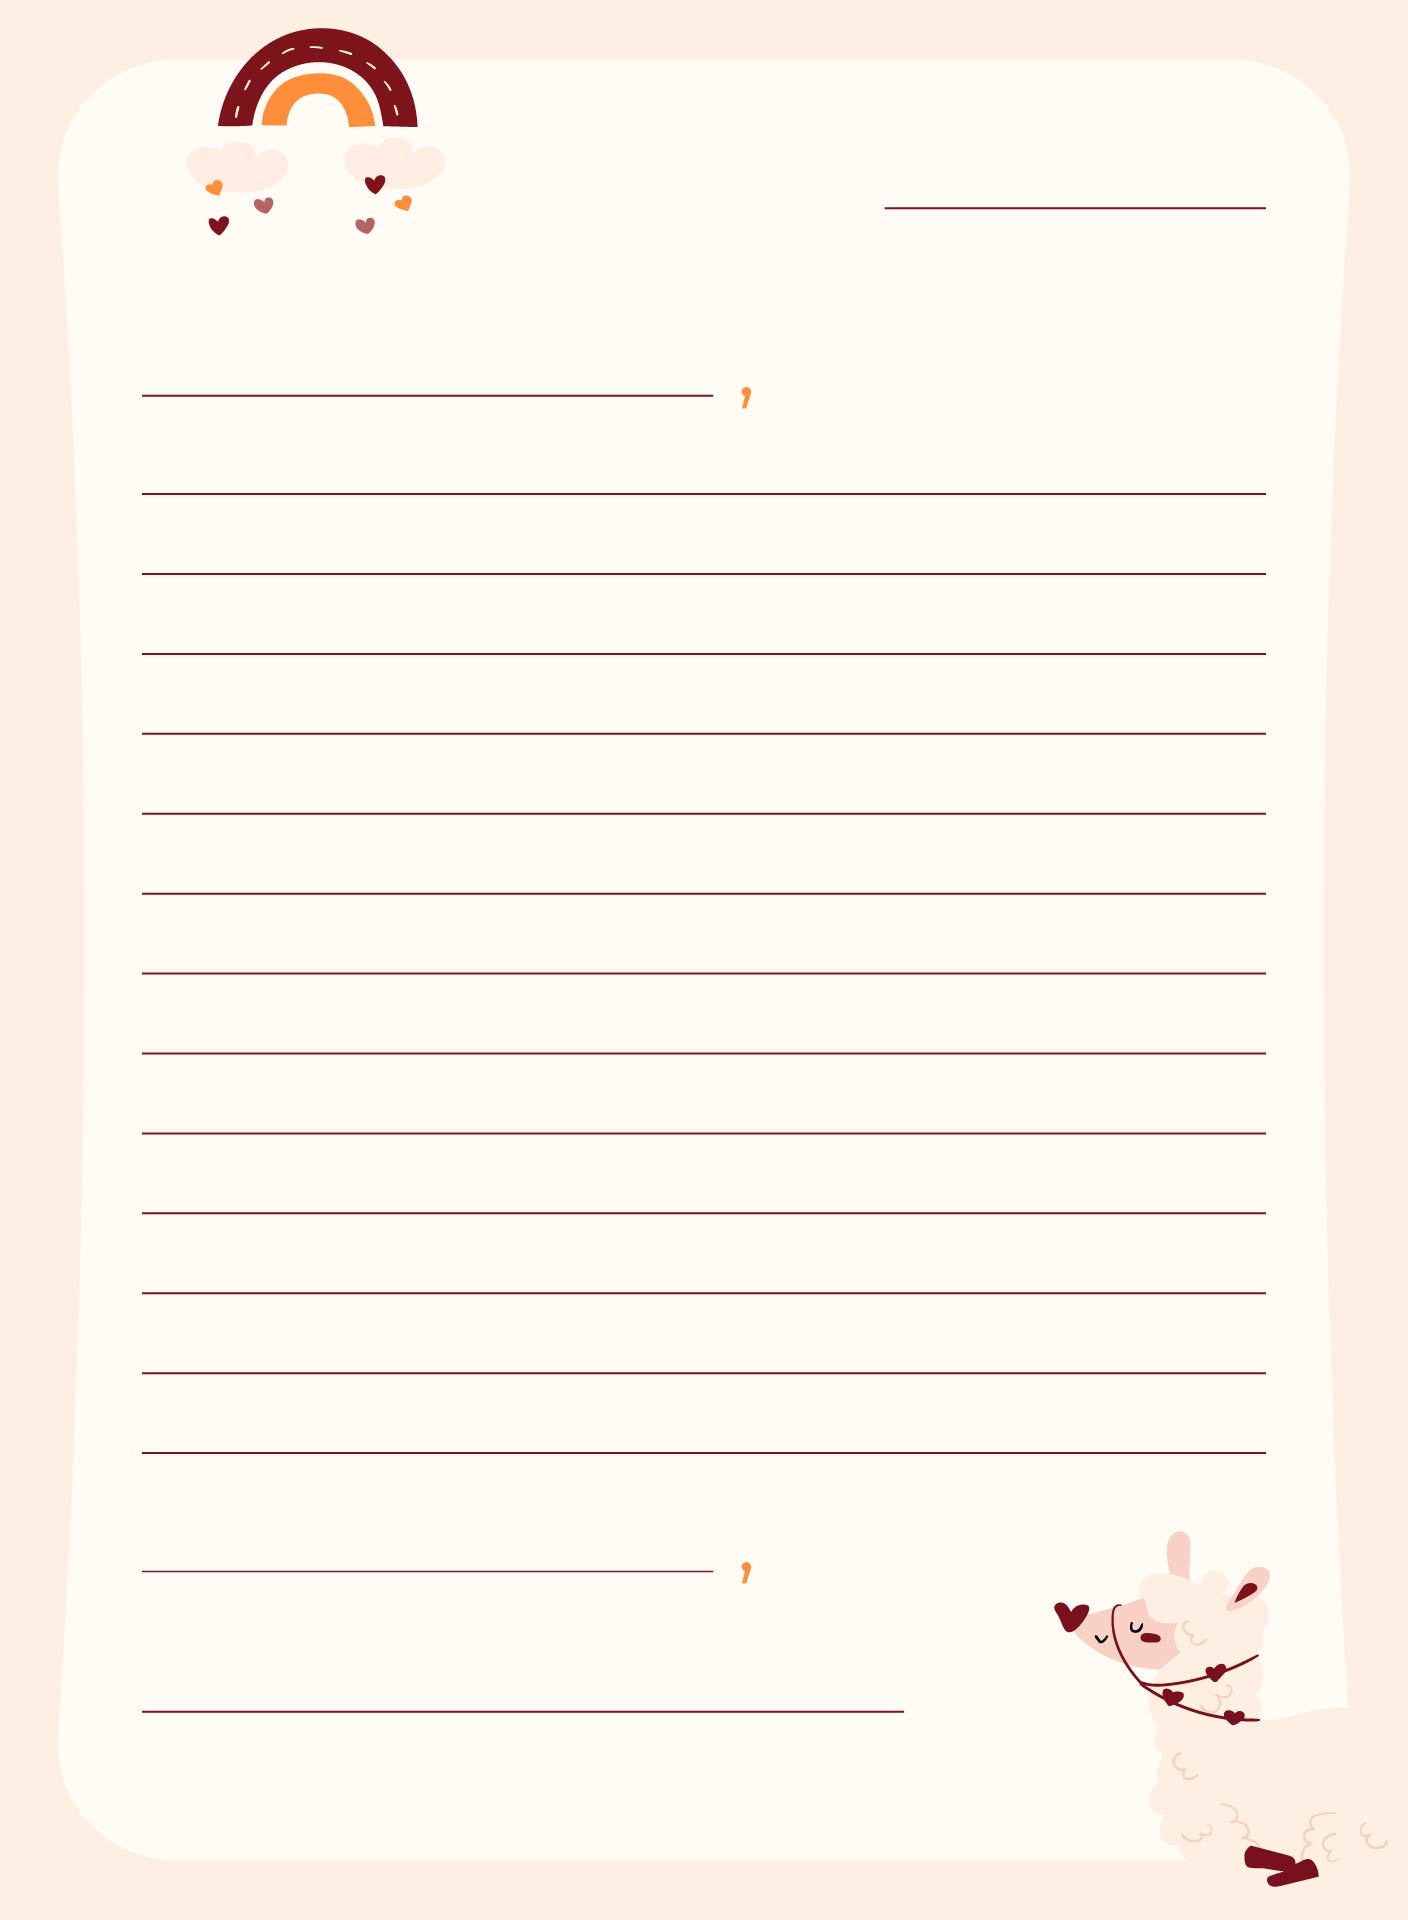 Blank Letter Template For Students Cover Letters - Riset